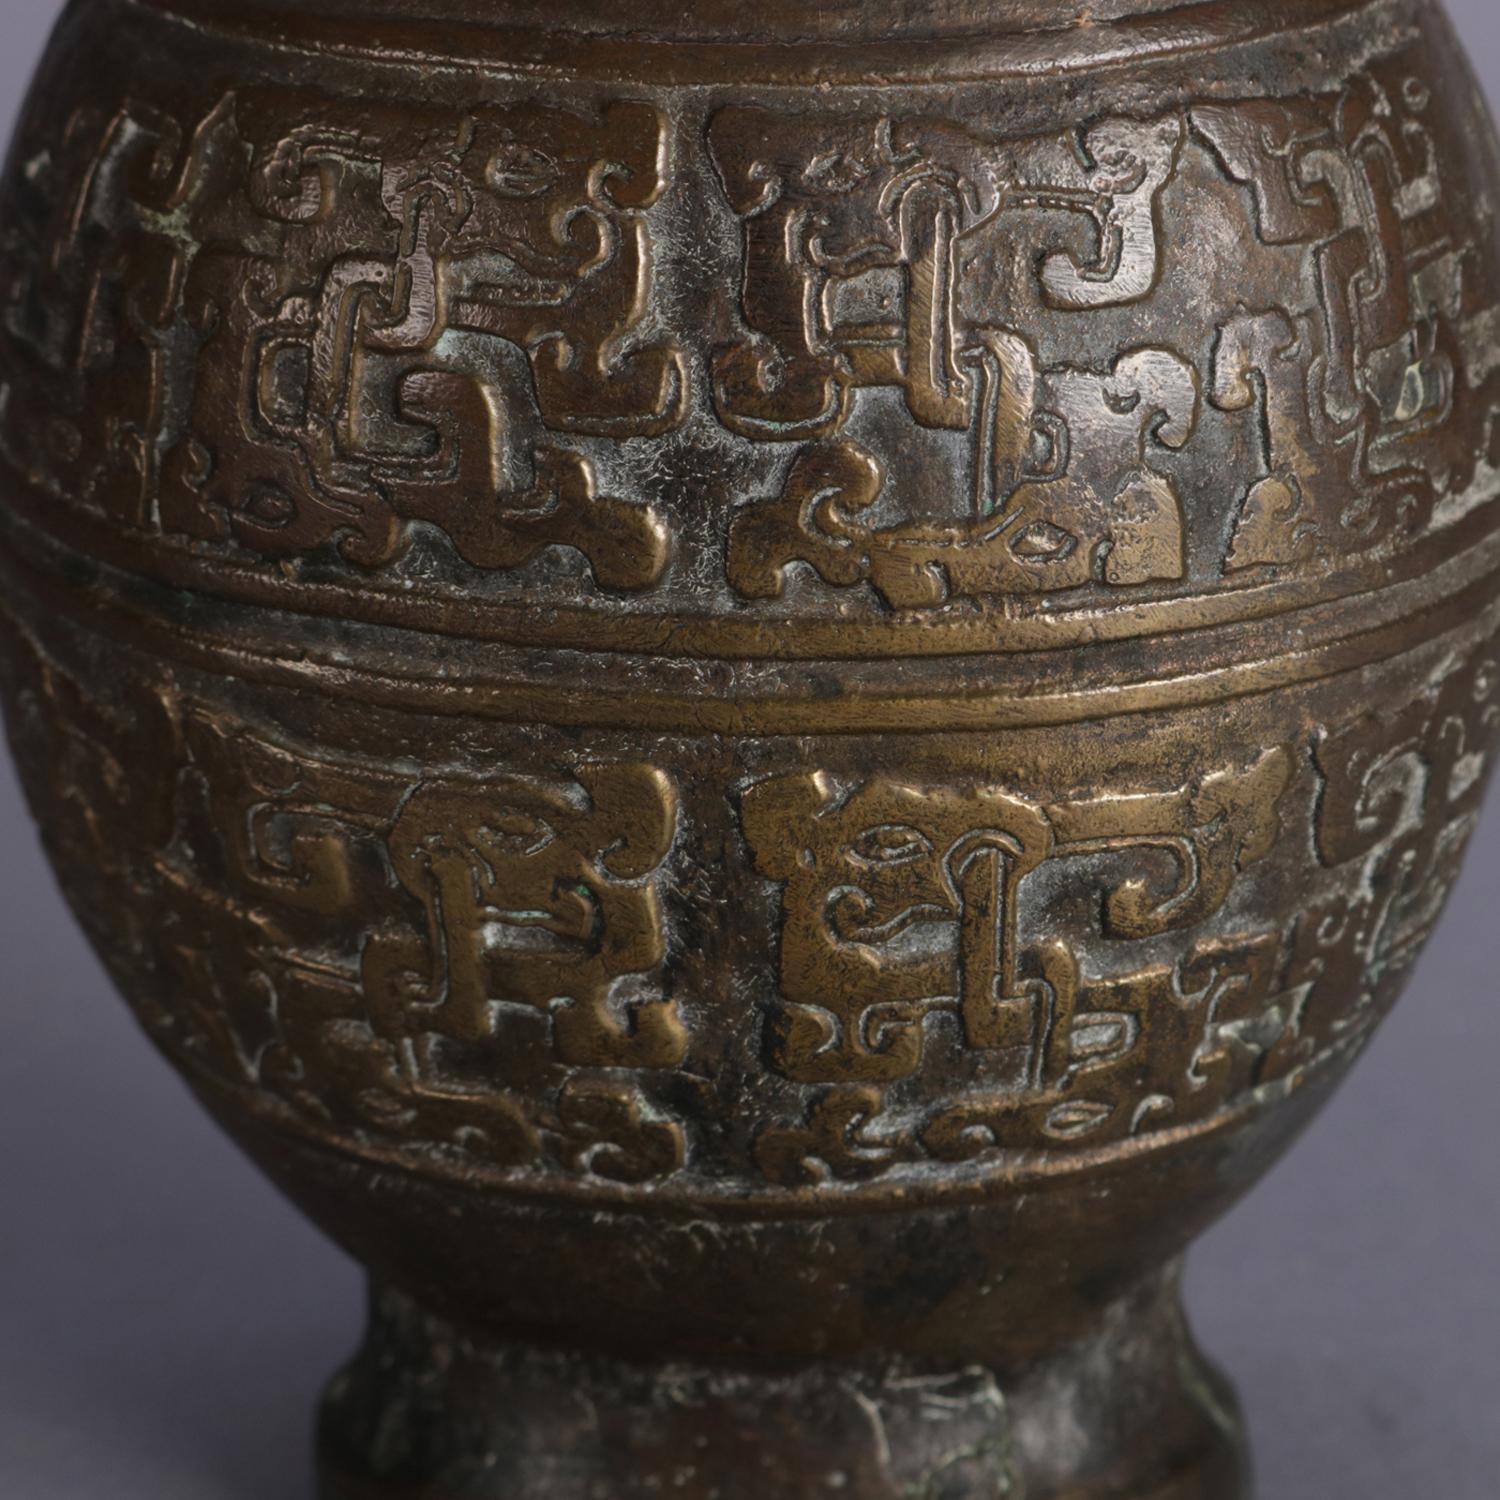 Antique Chinese vase features bronzed cast metal vase features bulbous form with double chicken head form handles, stylized scroll form heart collar and central band with stylized figures and symbols, circa 1900.

Measures: 9.25